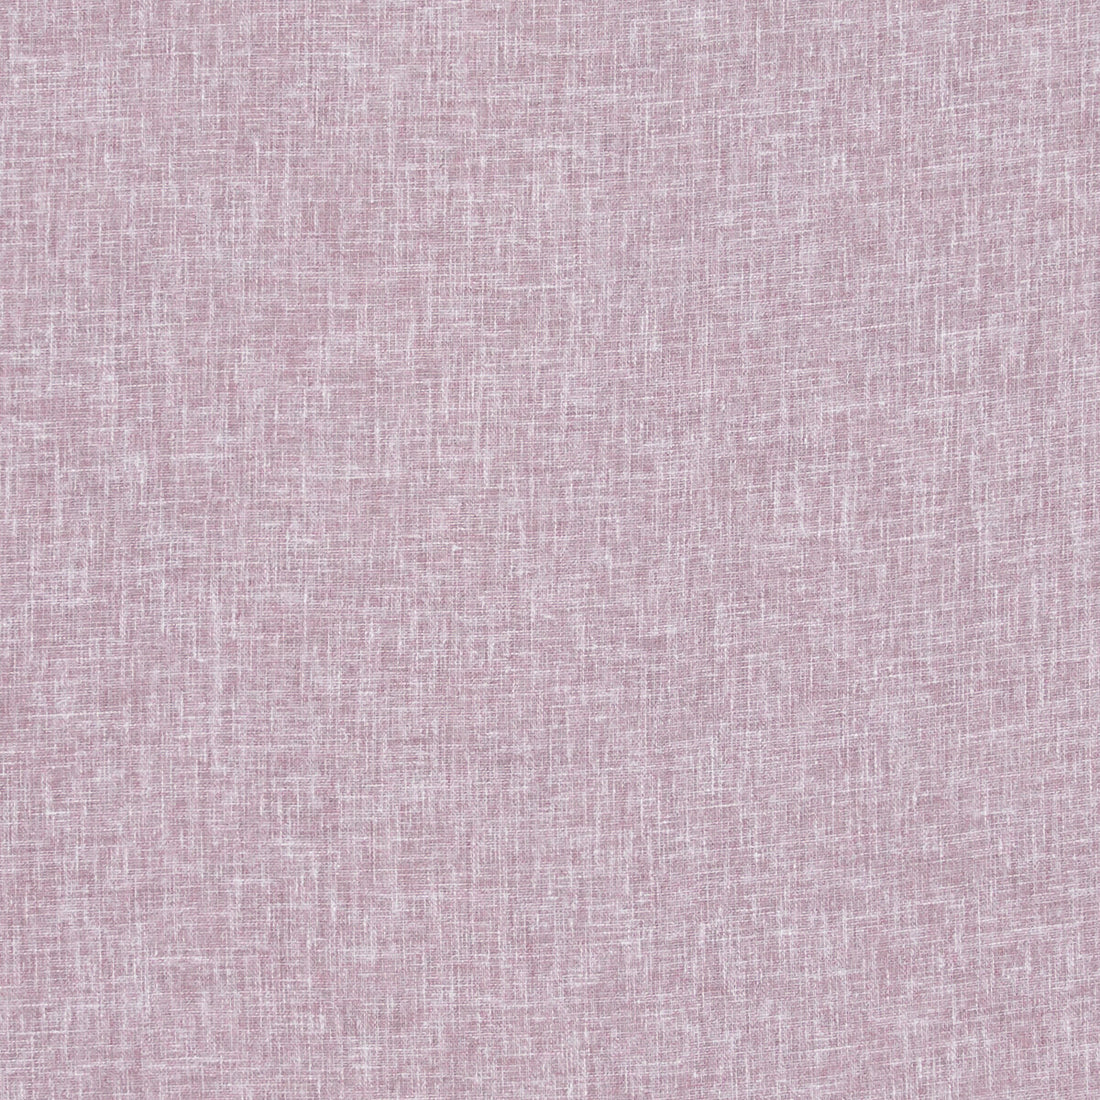 Midori fabric in lilac color - pattern F1068/24.CAC.0 - by Clarke And Clarke in the Clarke &amp; Clarke Midori collection